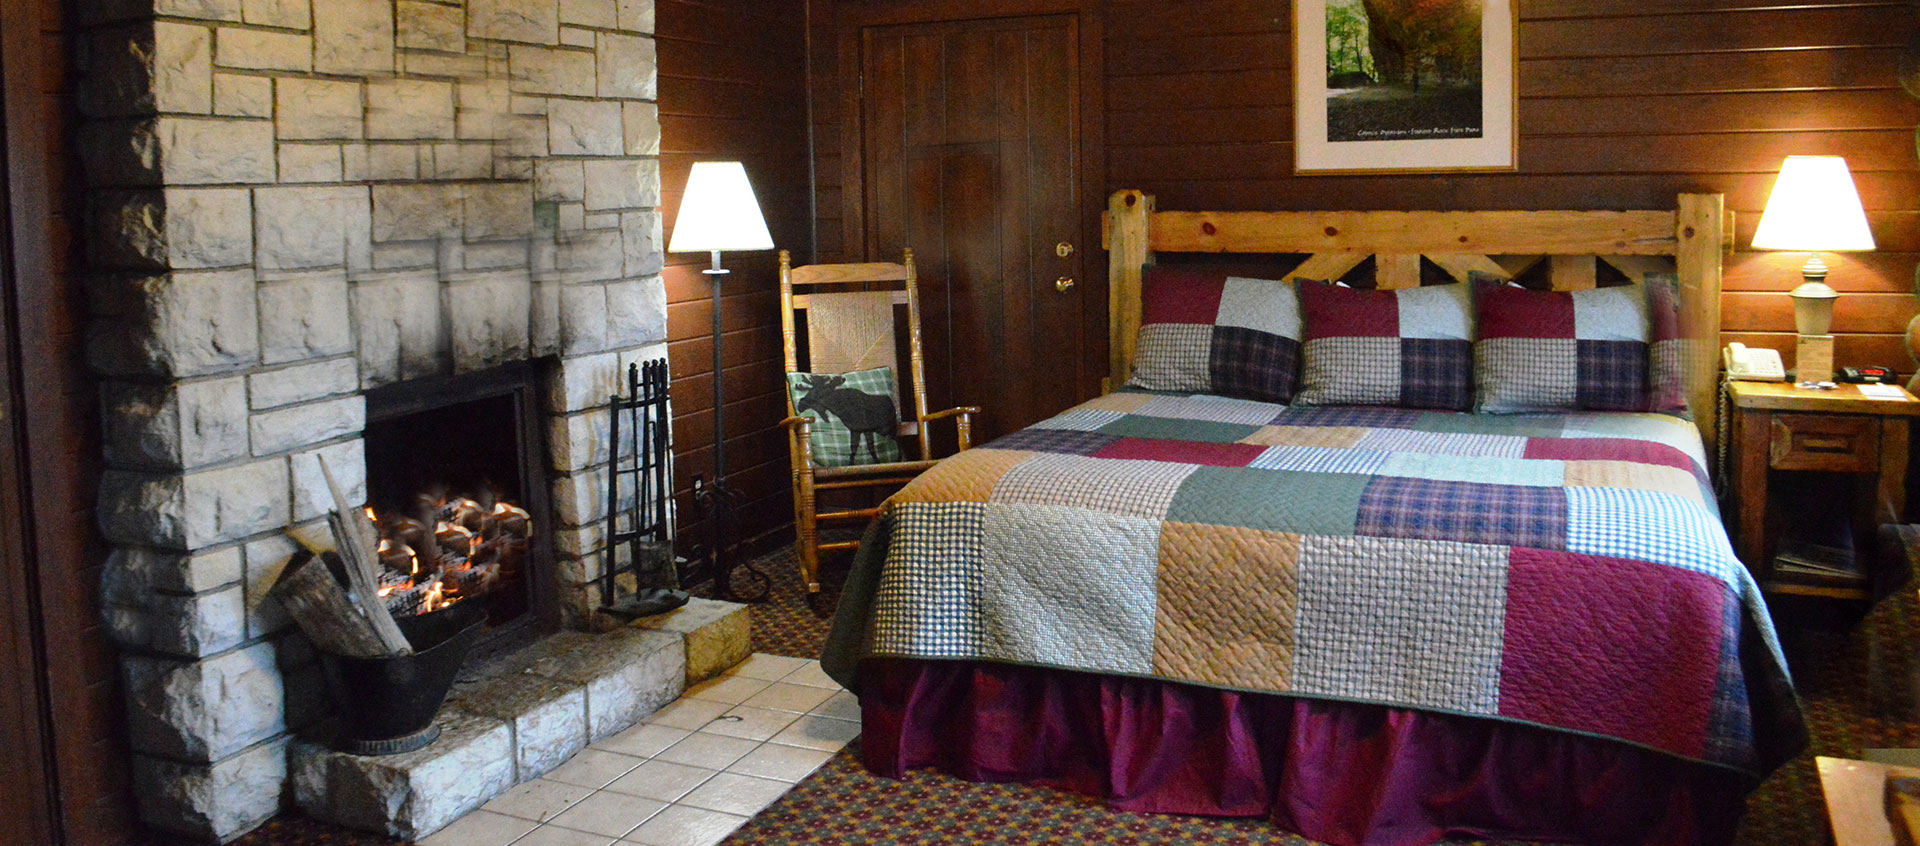 Starved Rock Country - Starved Rock Lodge Book your getaway with us